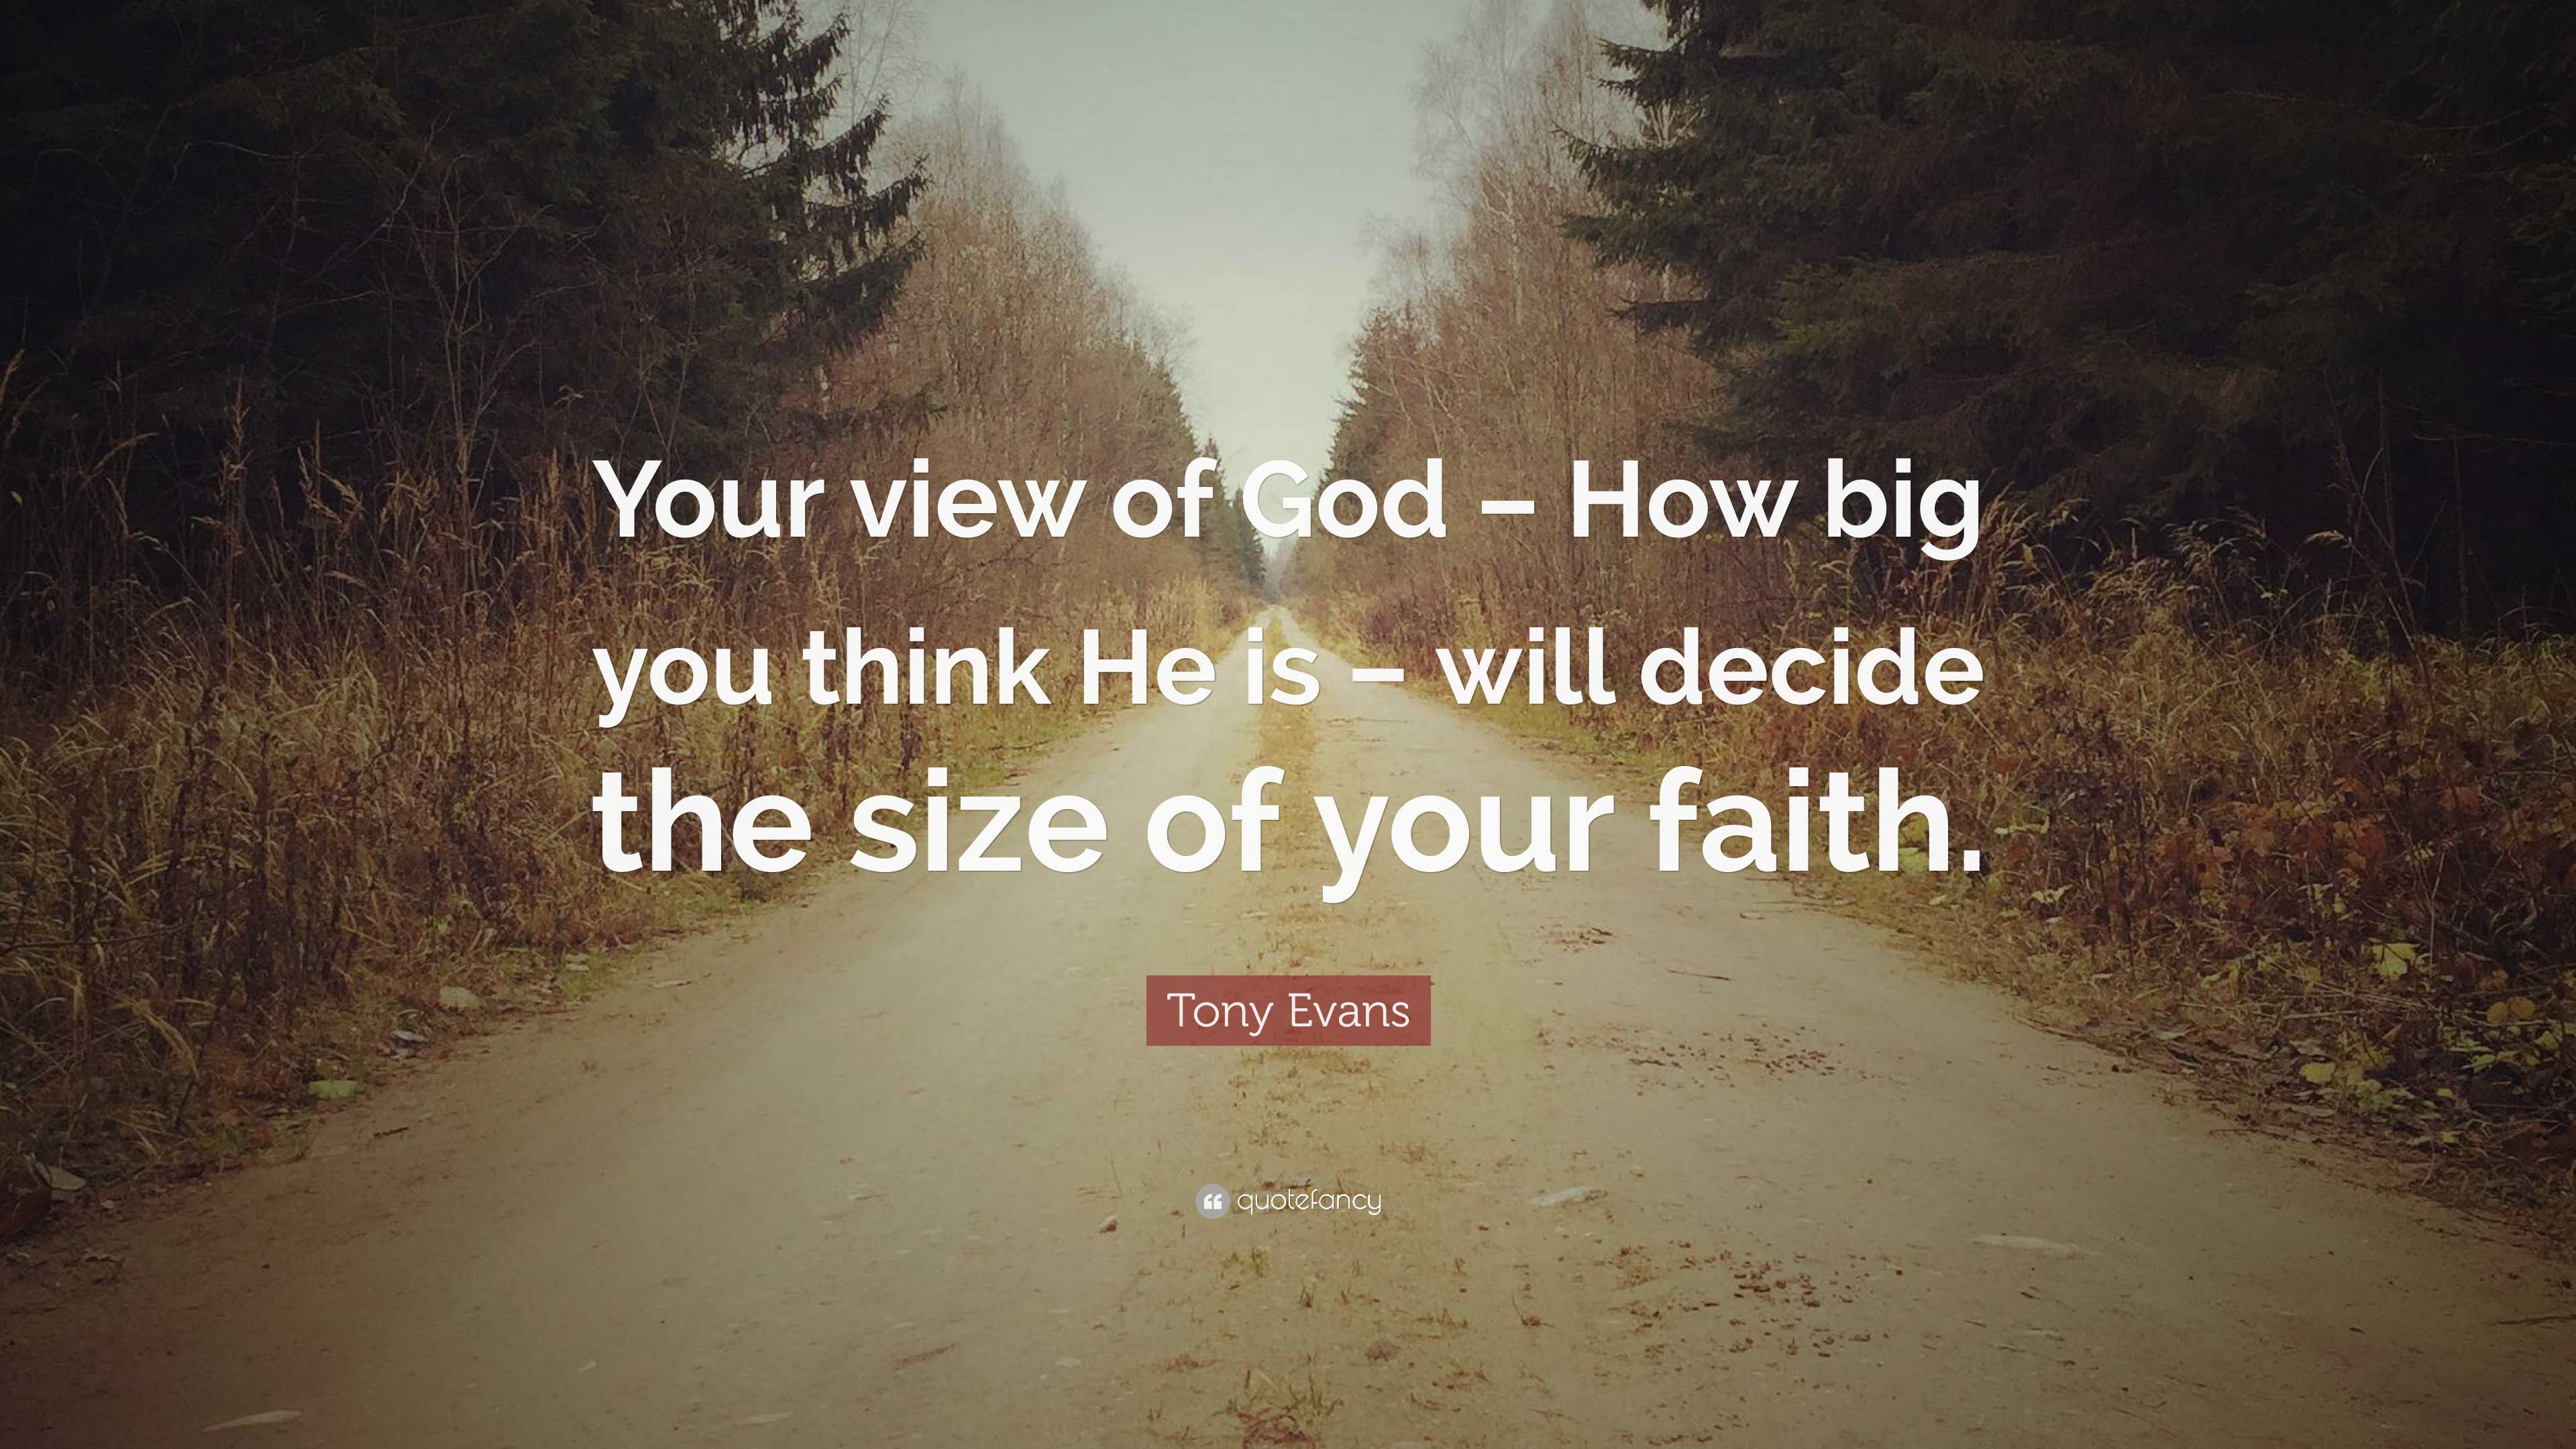 Tony Evans Quote: “Your view of God – How big you think He is – will ...